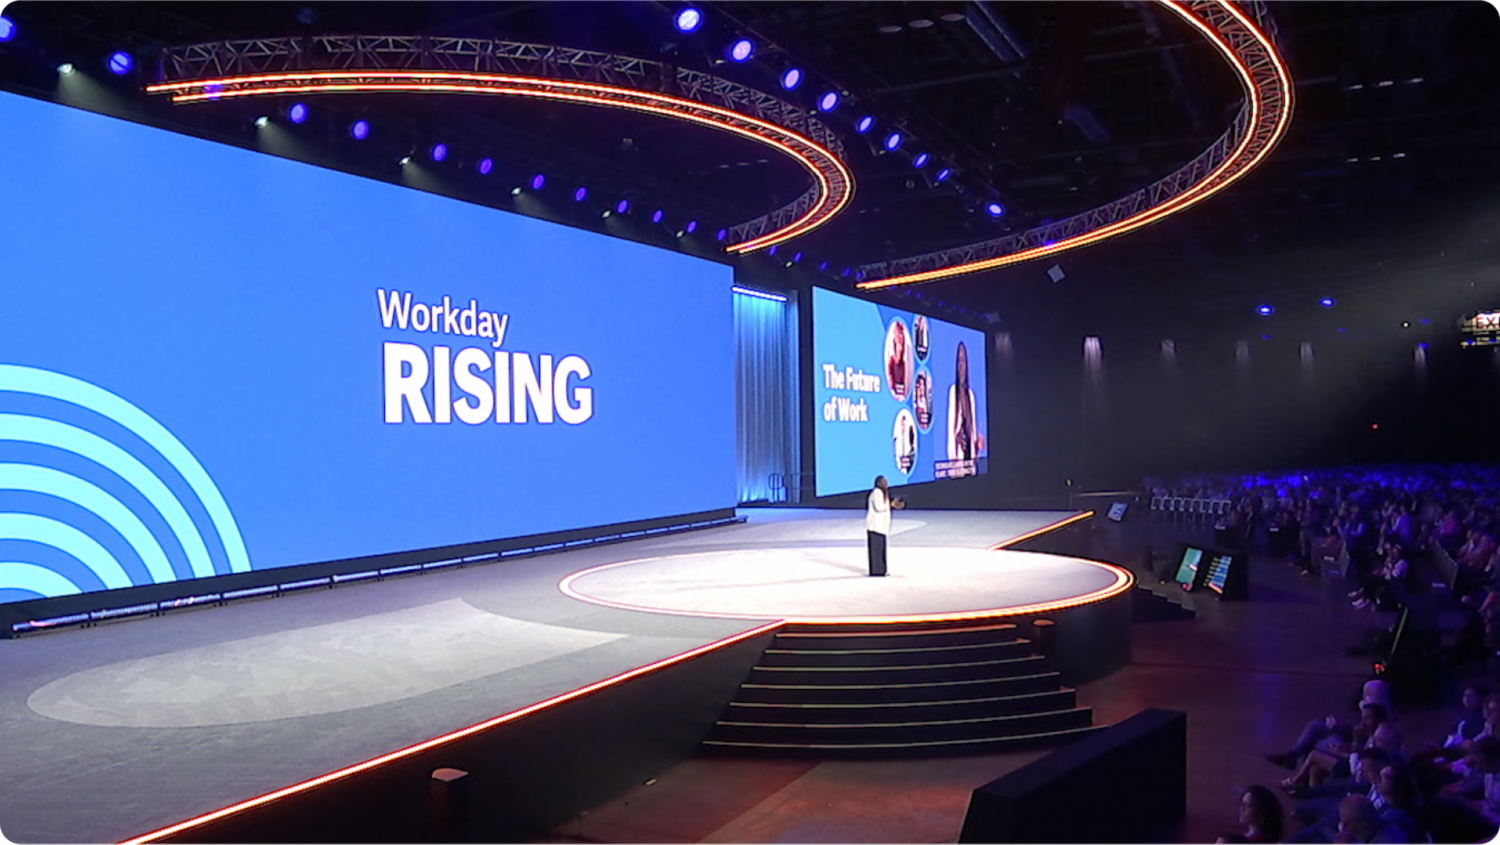 Watch video highlights from Workday Rising.